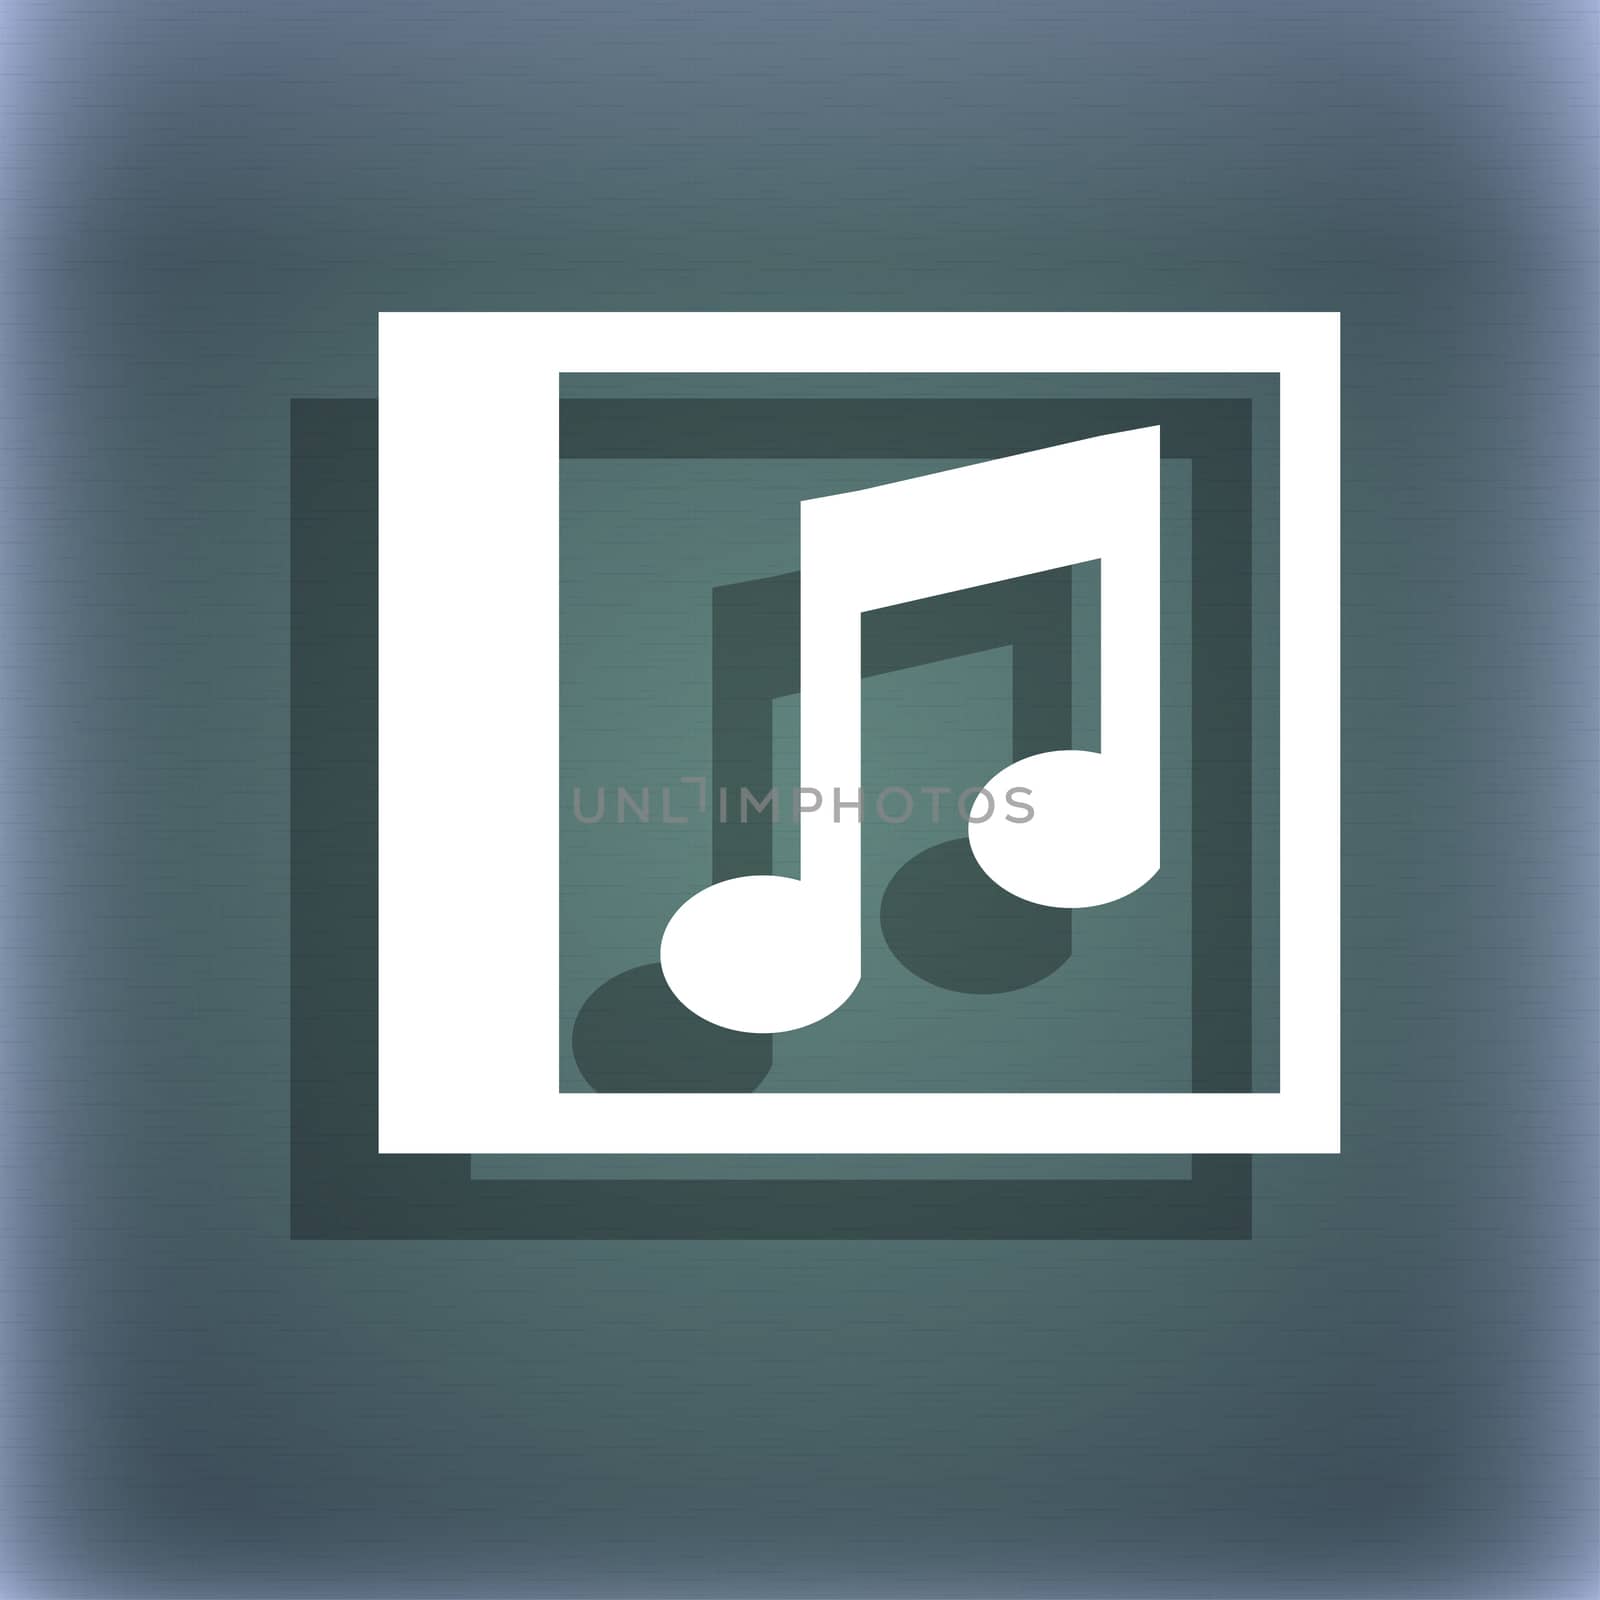 Audio, MP3 file icon symbol on the blue-green abstract background with shadow and space for your text. illustration